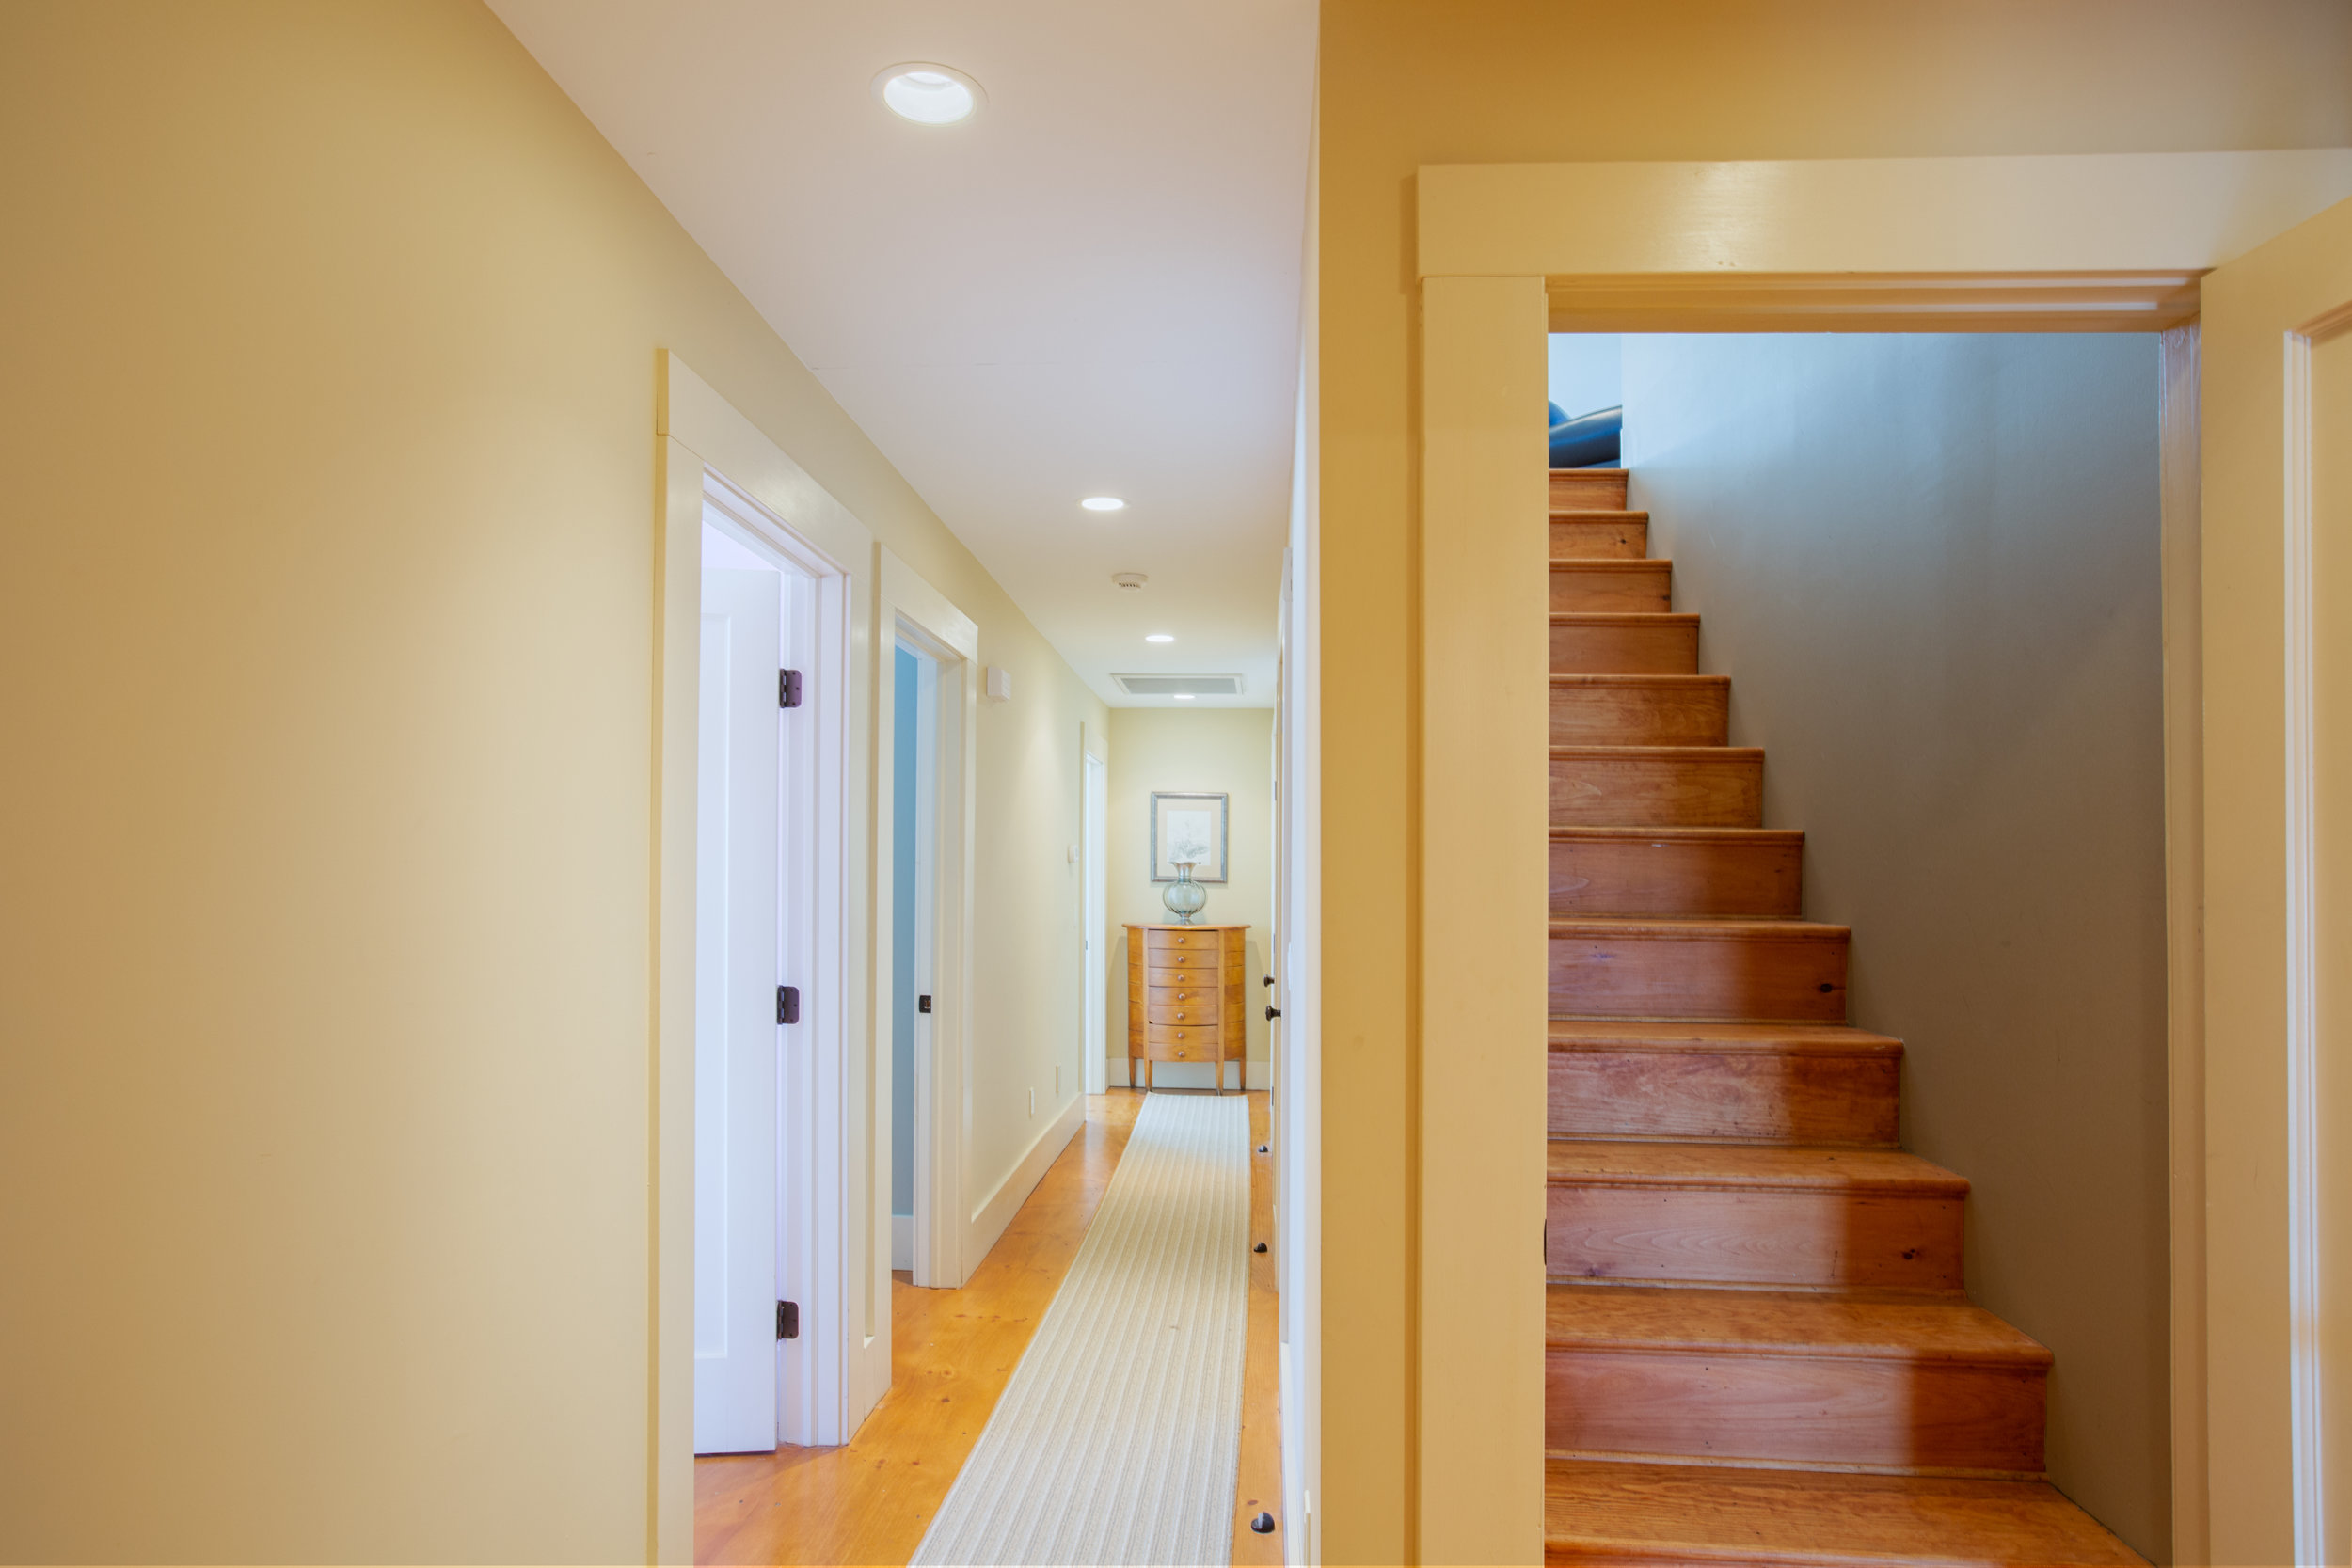  Hallway and stairway view.  White running leads to end of the hall.  Two white doors are next to one another leading into to separate rooms.  The stairs are wooden  and go straight up. 